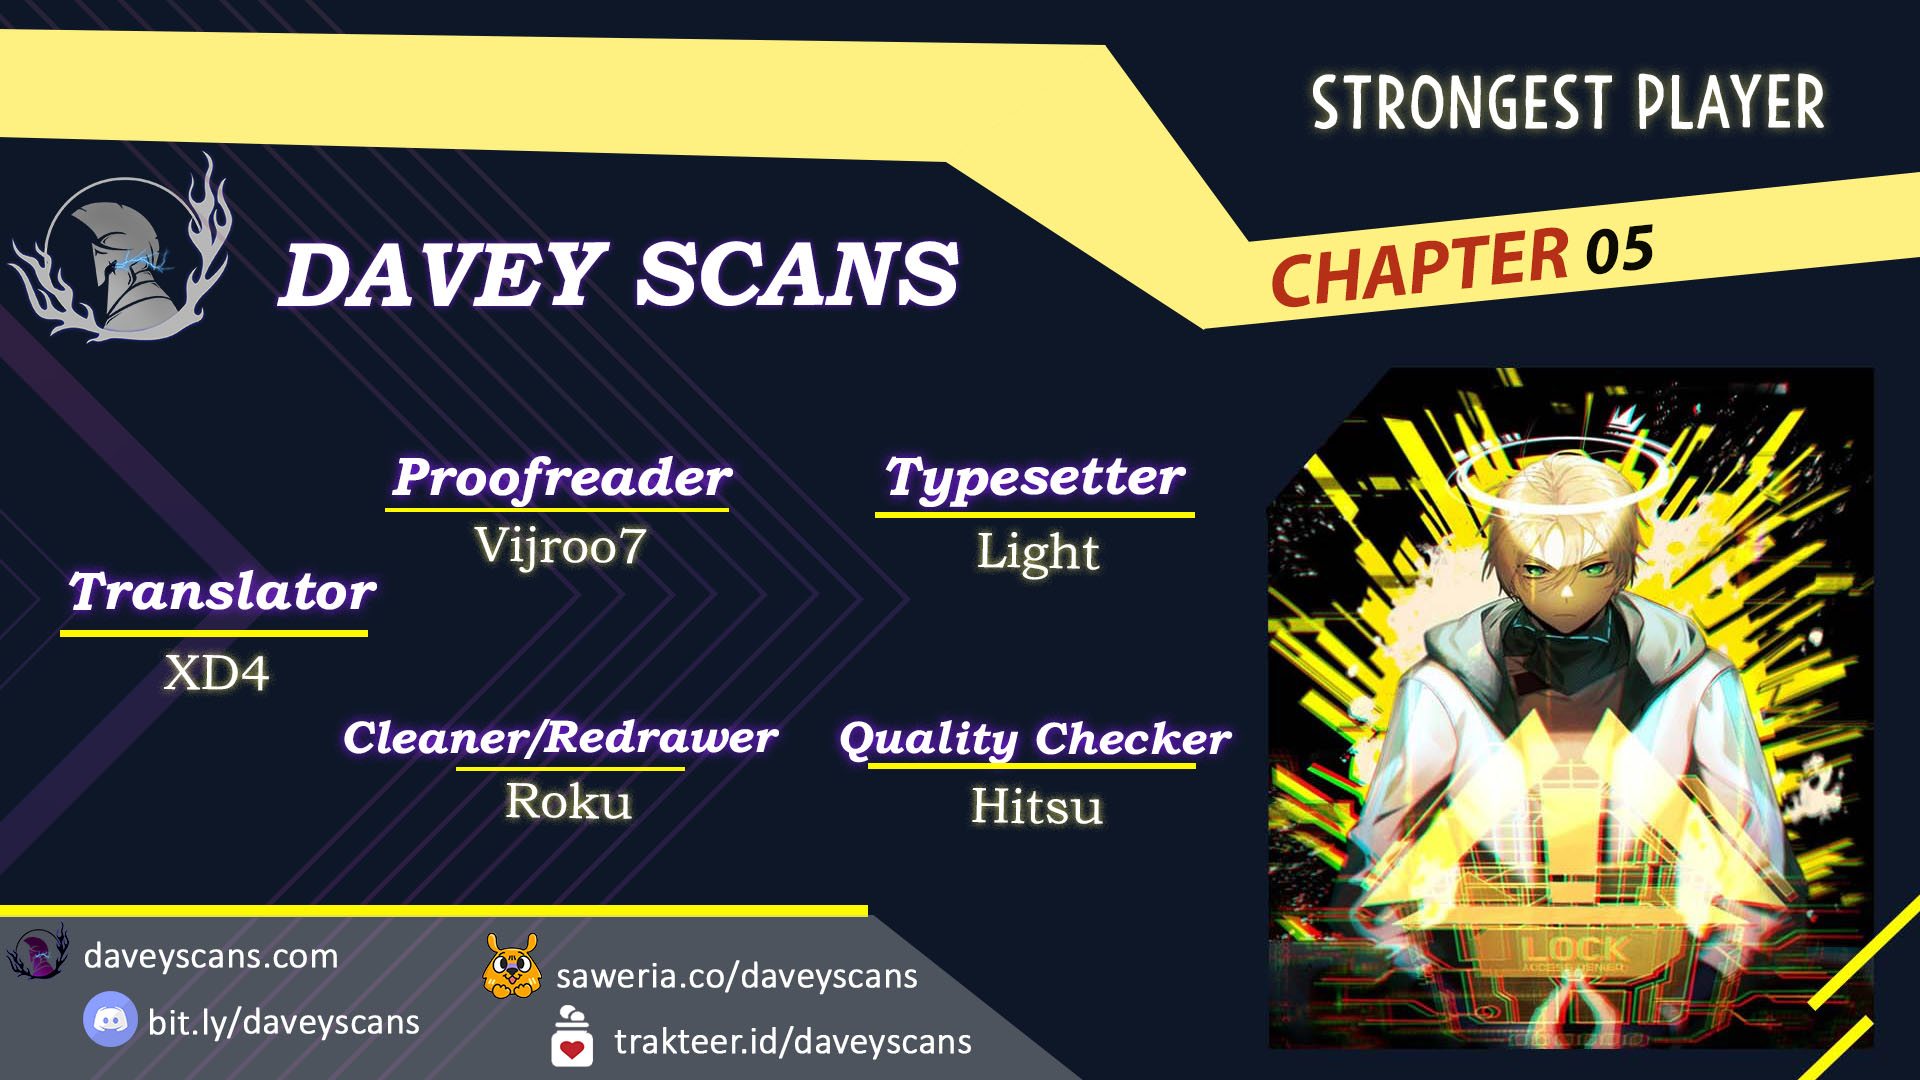 The Strongest Gamer Player Chapter 05